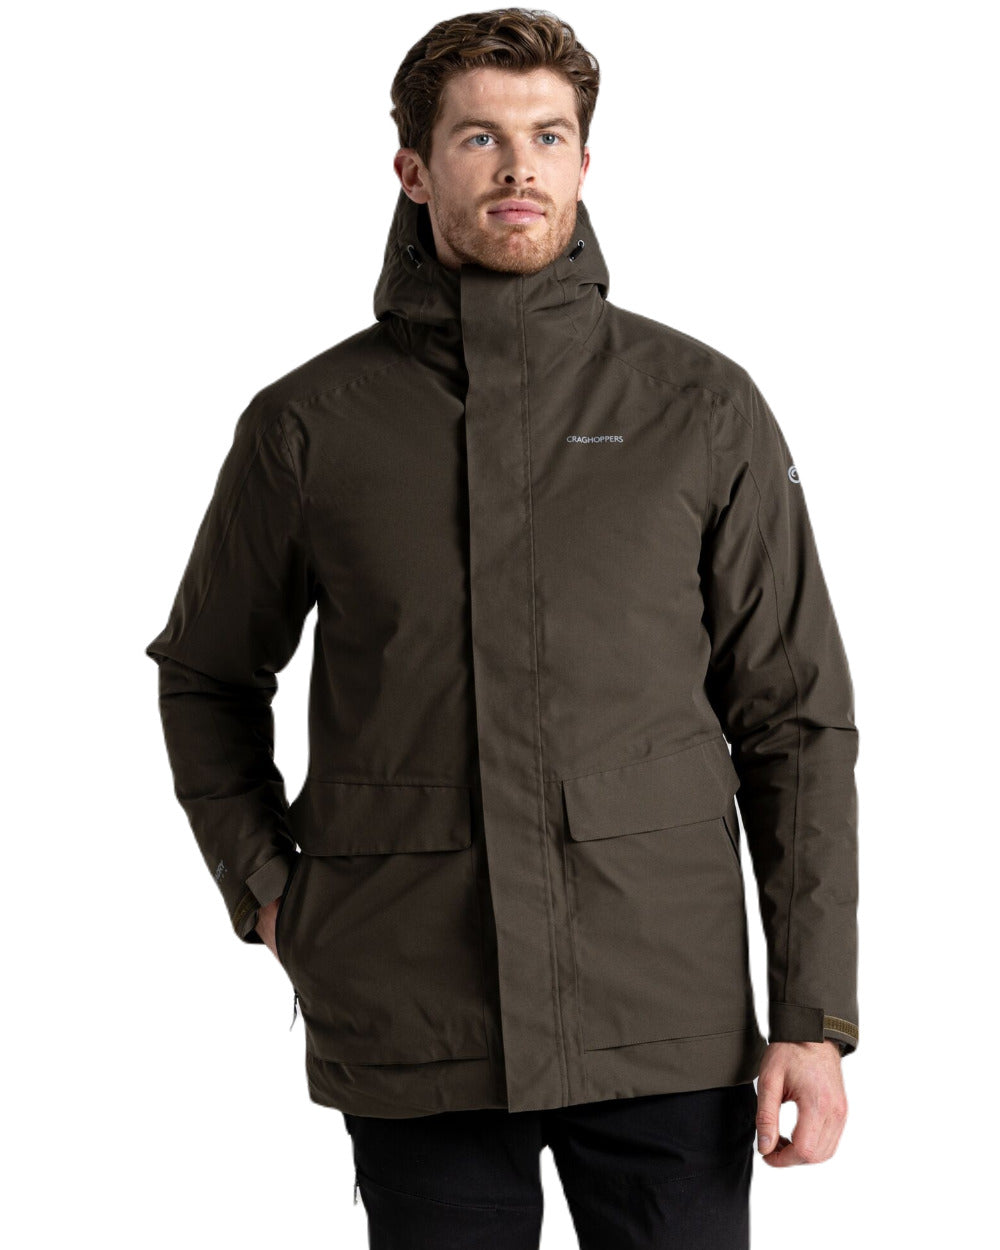 Woodland Green Coloured Craghoppers Mens Lorton Thermic Jacket On A White Background 